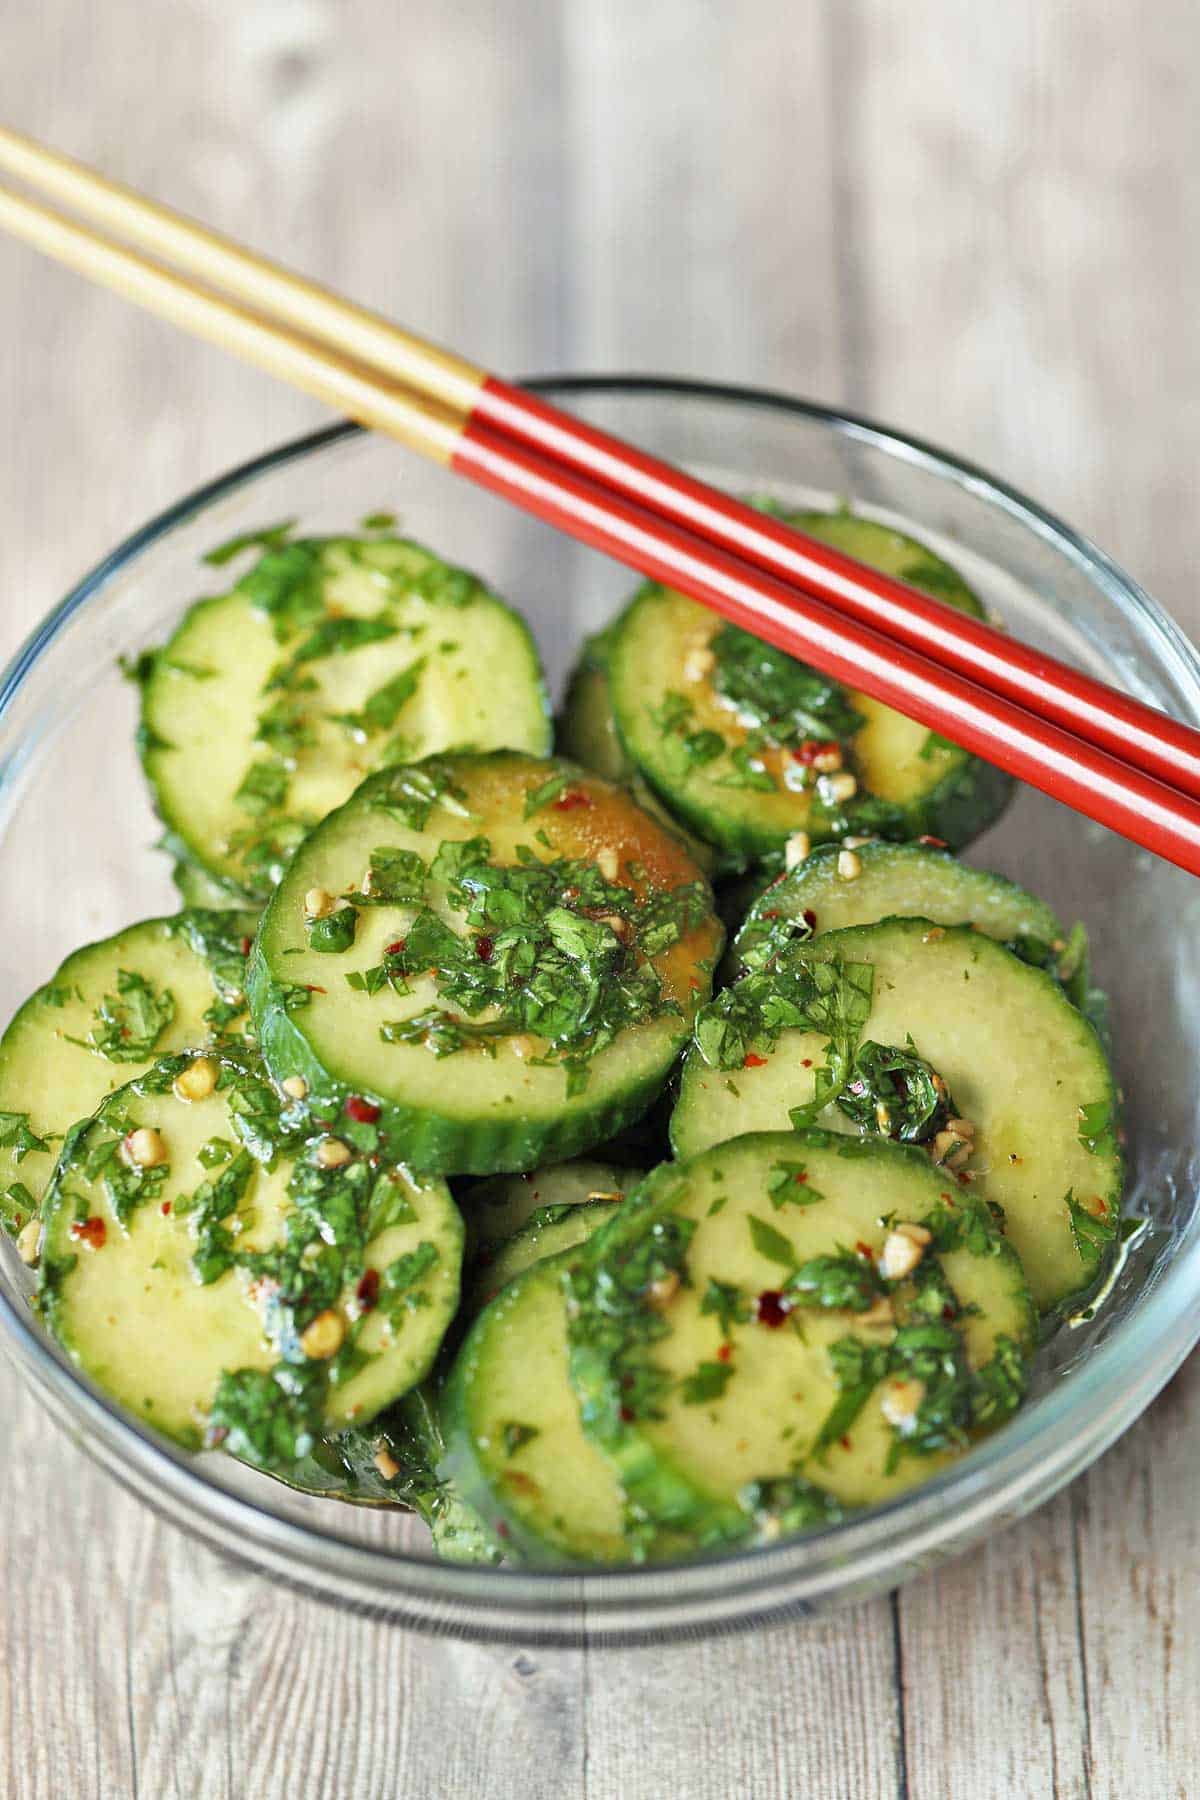 Asian cucumber salad served with red chopsticks.